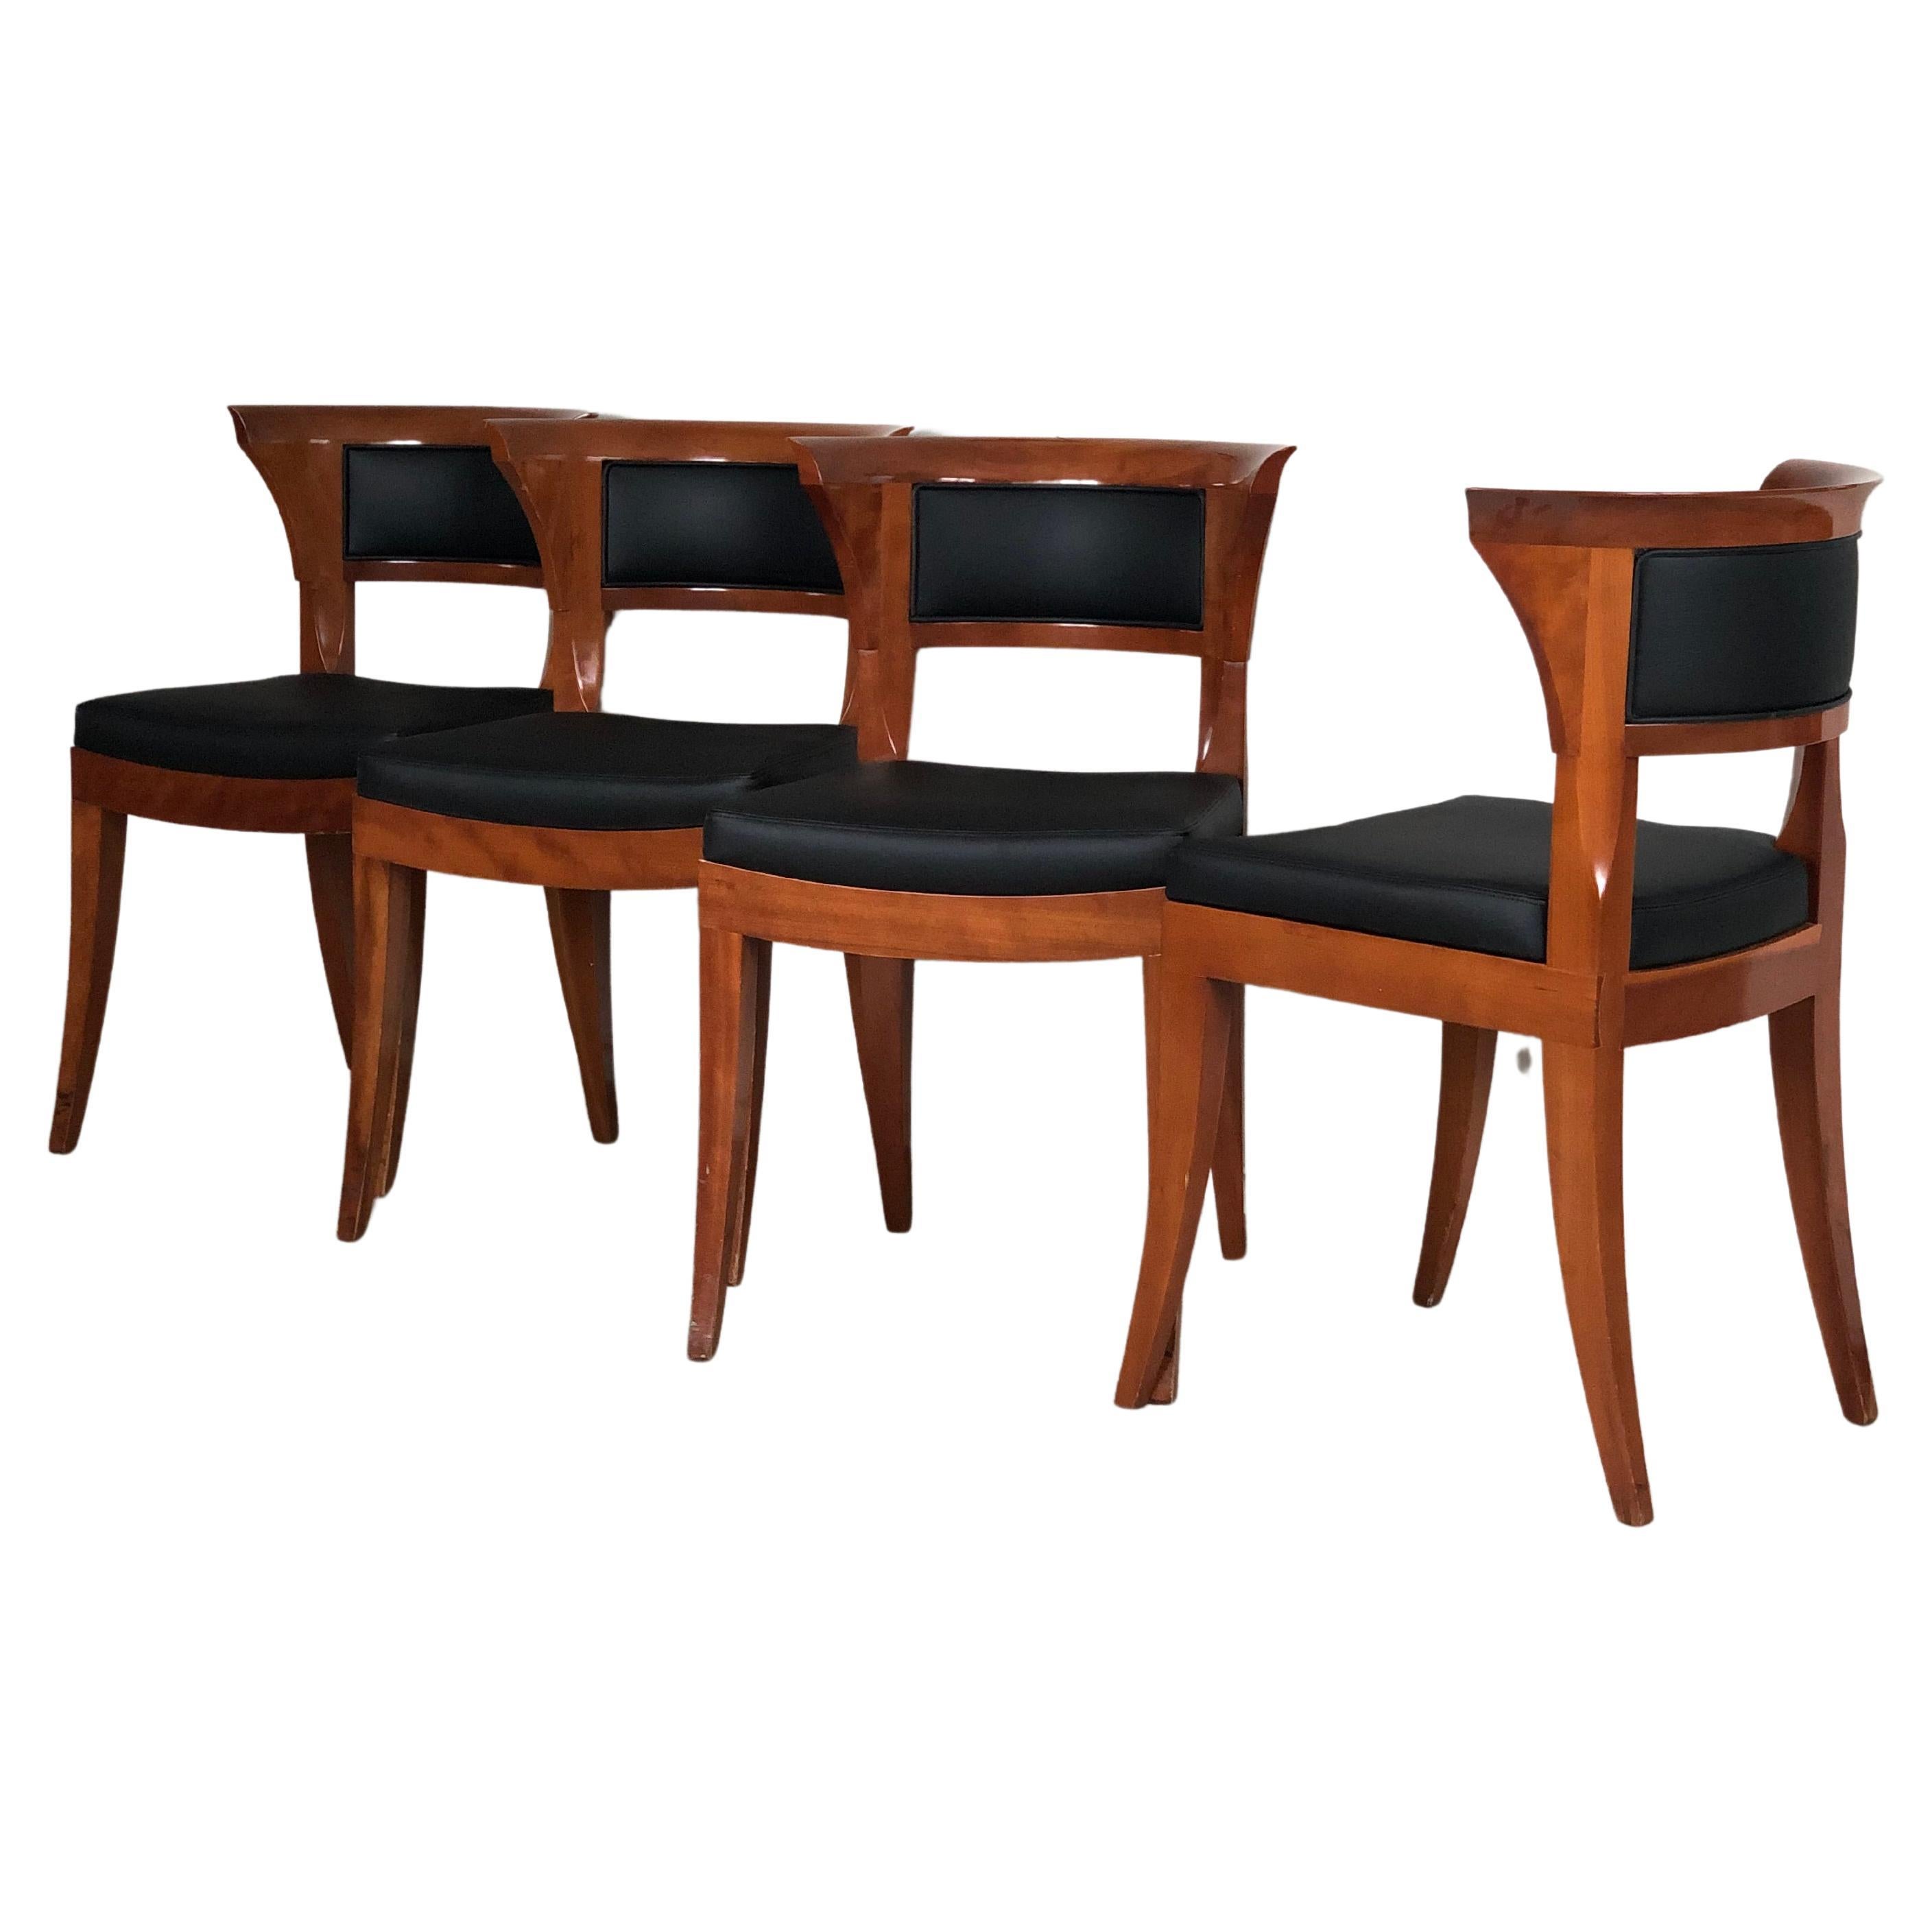 A Pair of 4 Giorgetti Cherry Wood Dining Chairs Model Sella Media by Leon Krier  For Sale